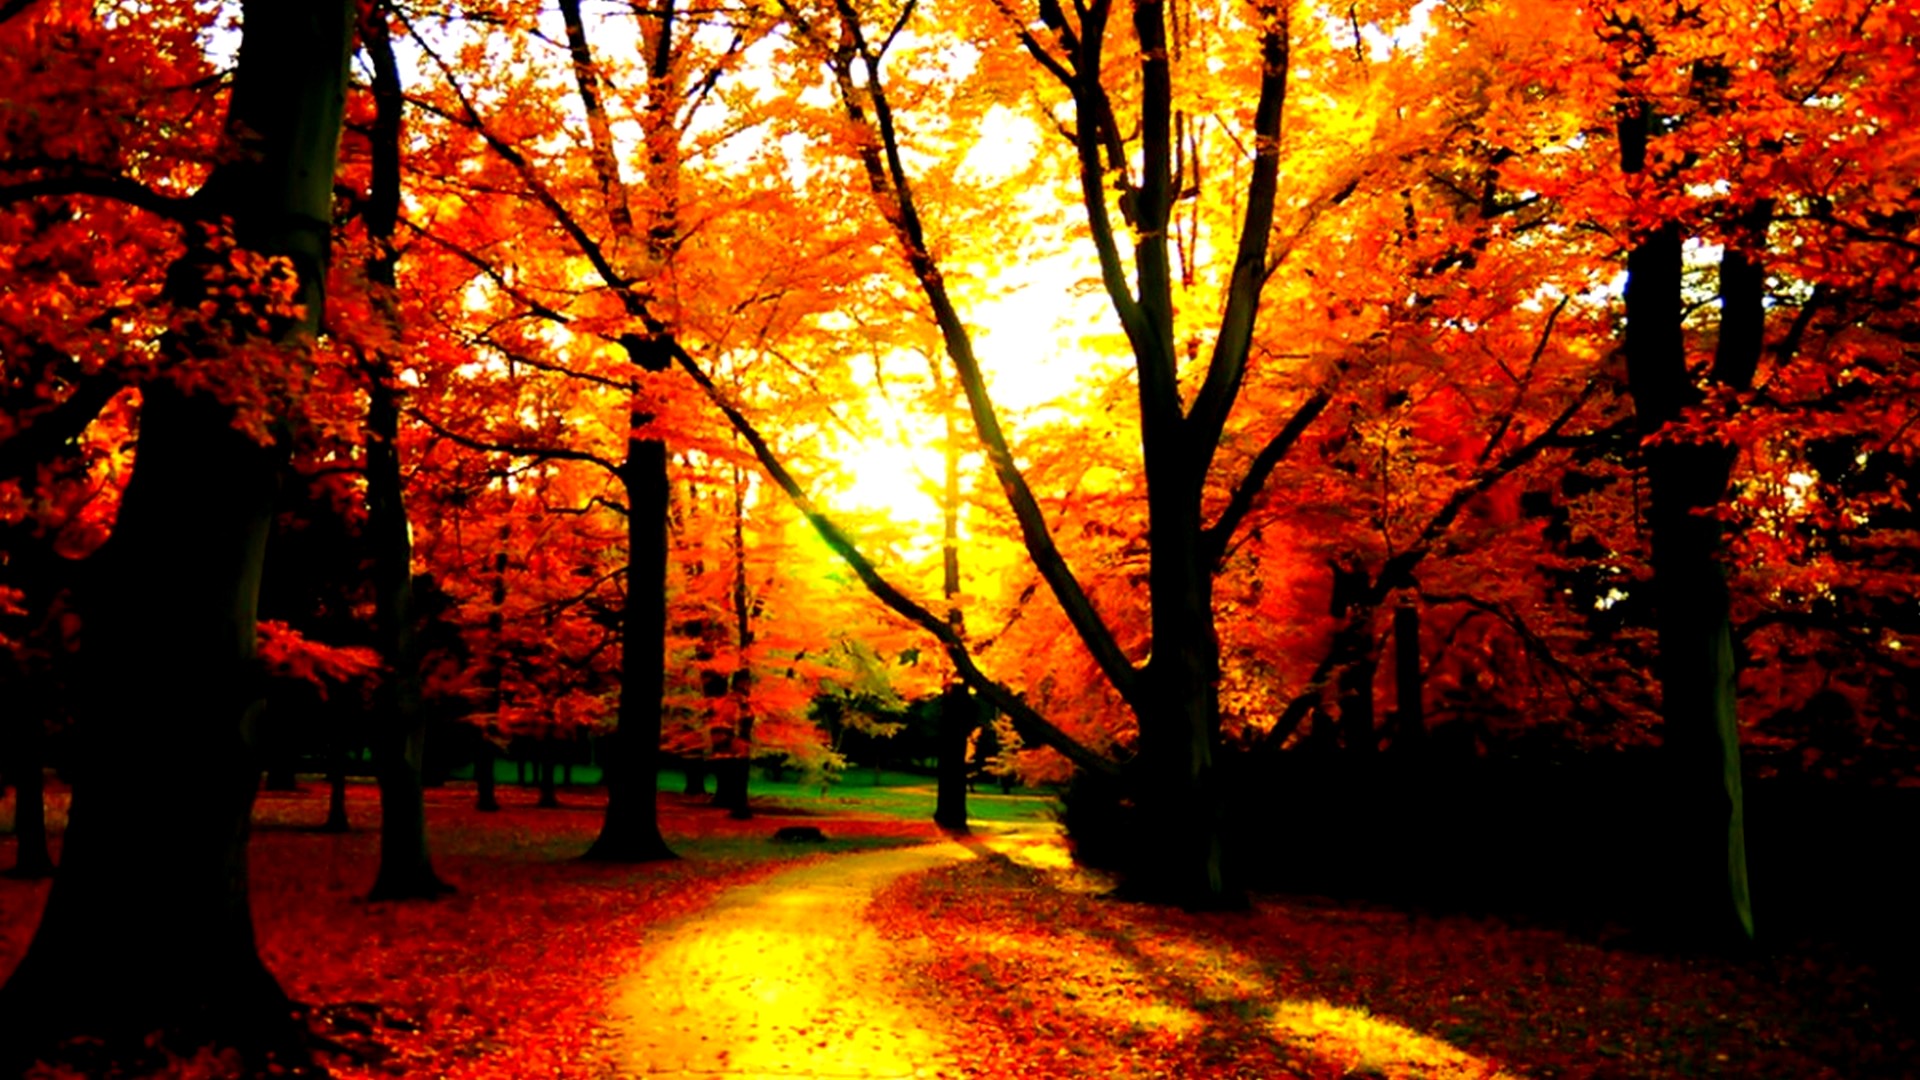 October HD Wallpaper with high-resolution 1920x1080 pixel. You can use this wallpaper for your Desktop Computer Backgrounds, Mac Wallpapers, Android Lock screen or iPhone Screensavers and another smartphone device